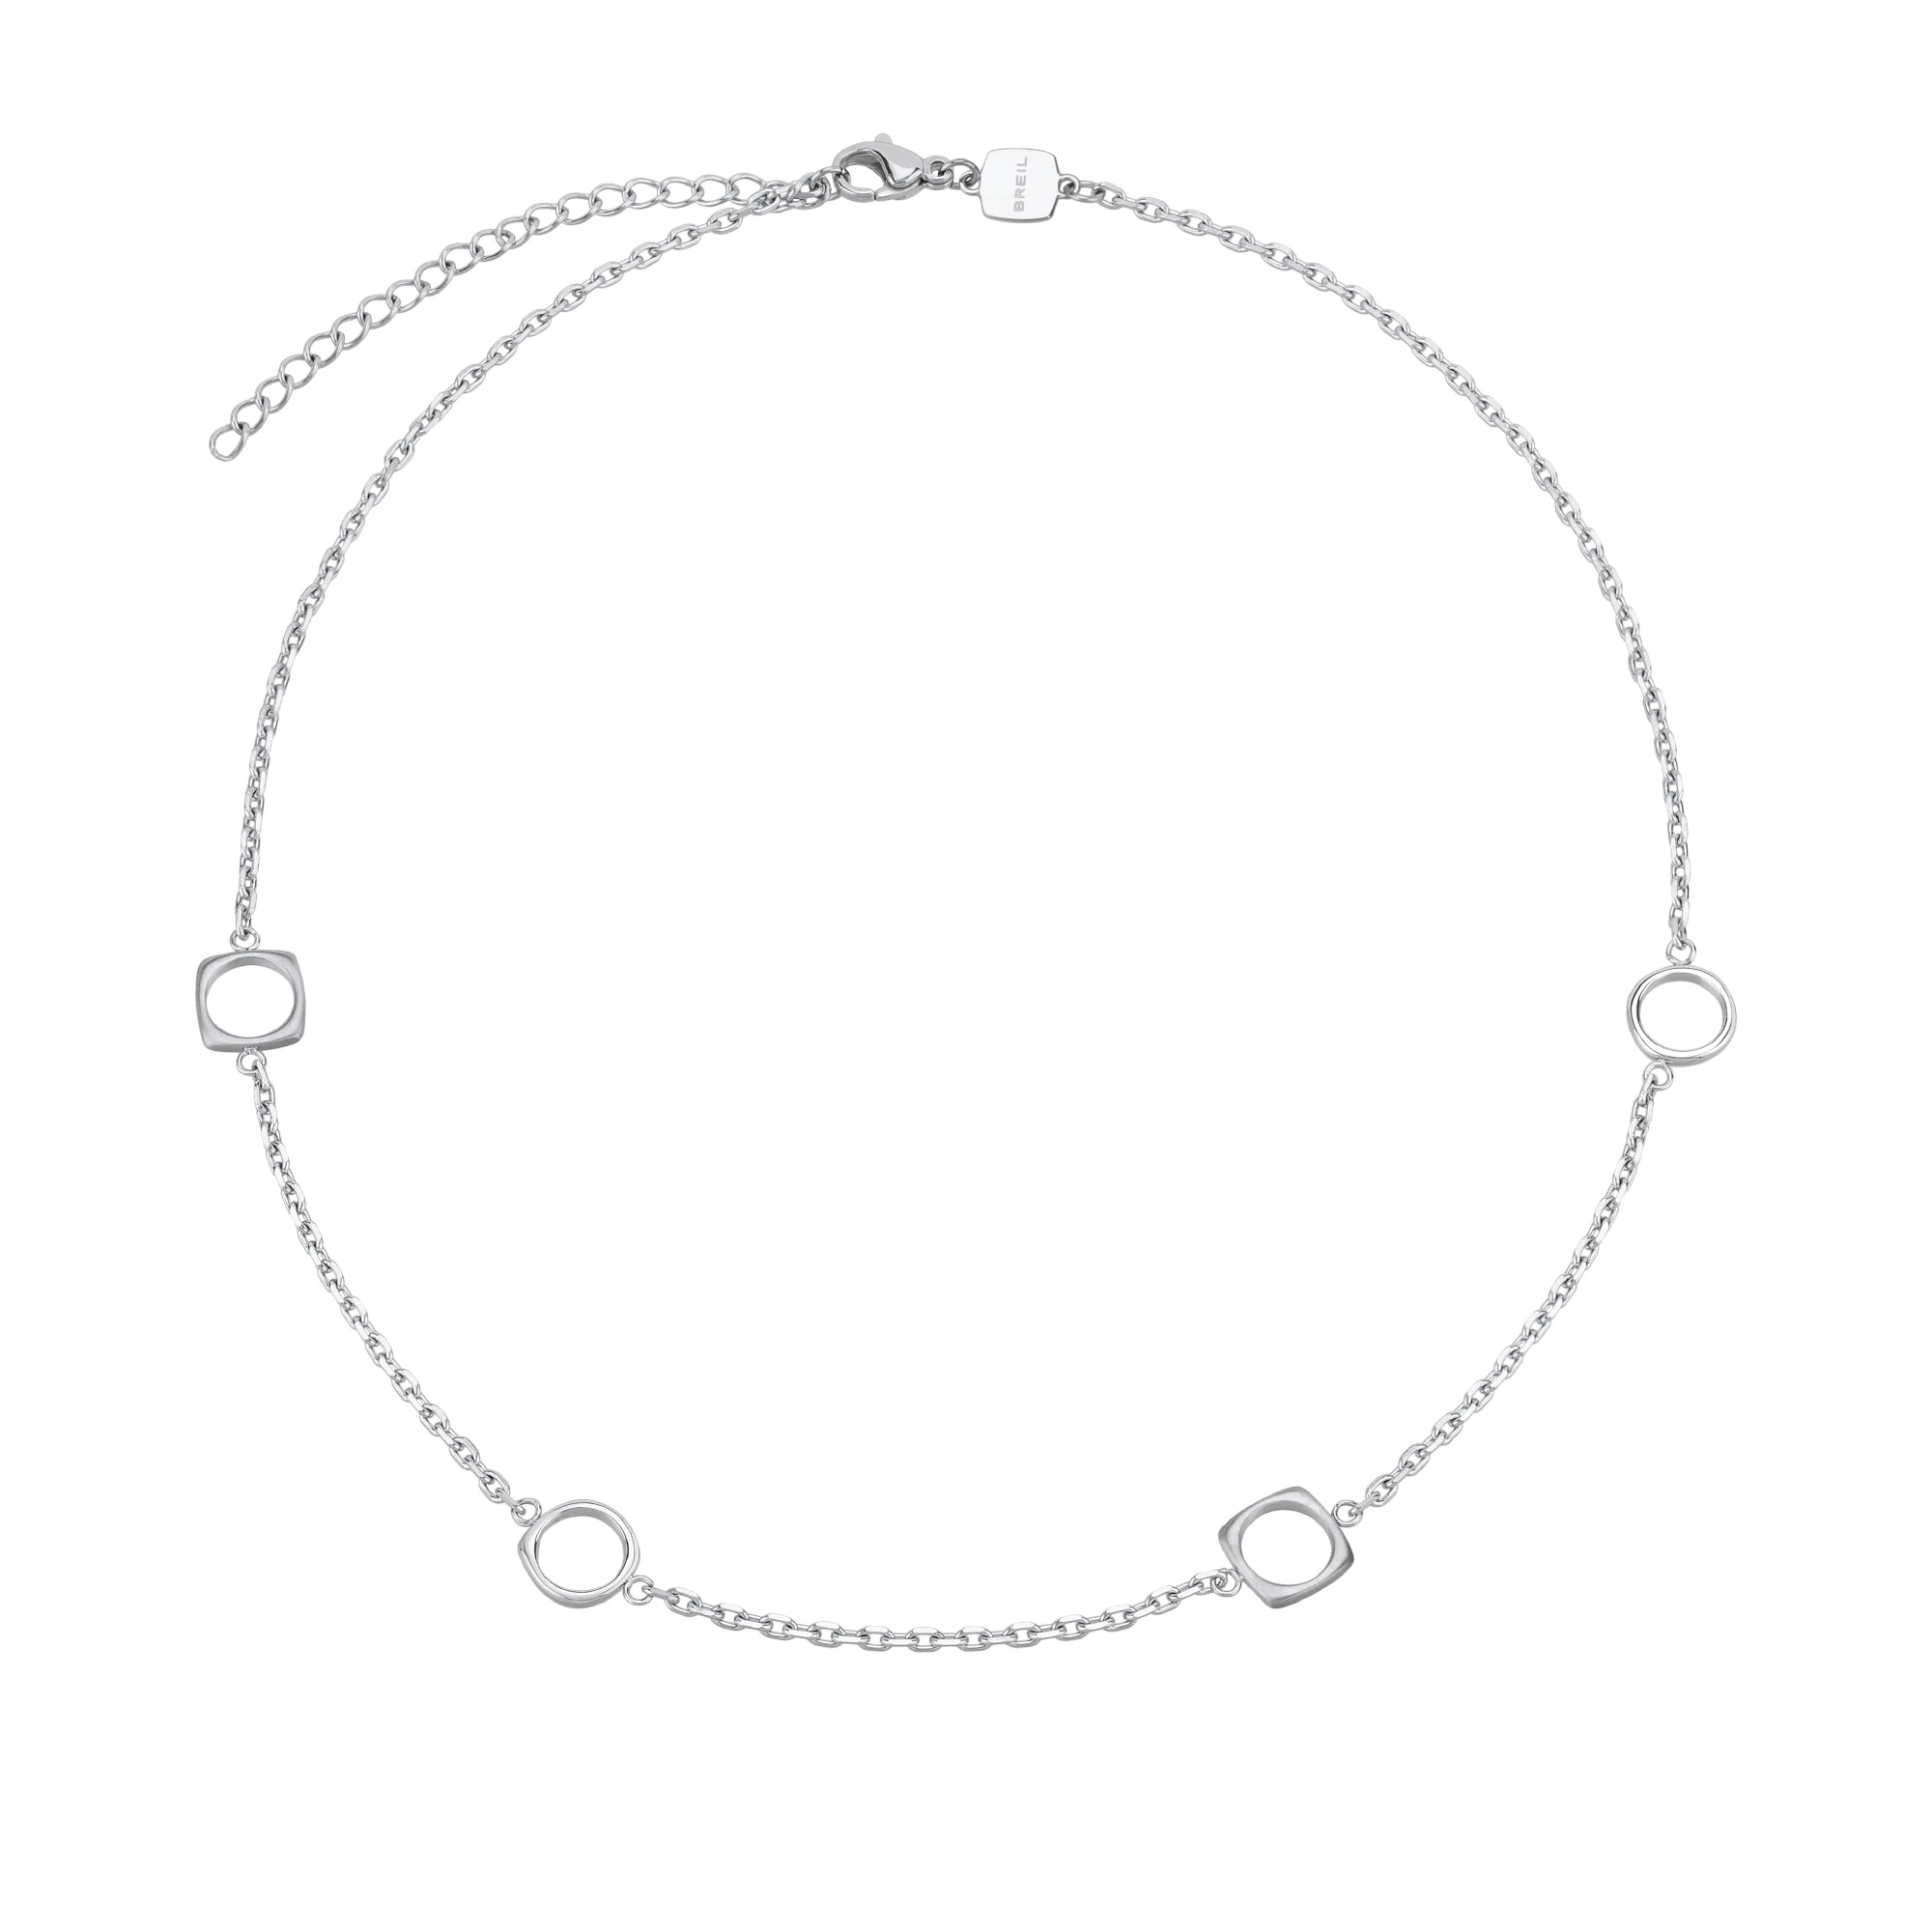 NEW TETRA - STAINLESS STEEL NECKLACE WITH MICRO-CHAIN - 1 - TJ3167 | Breil